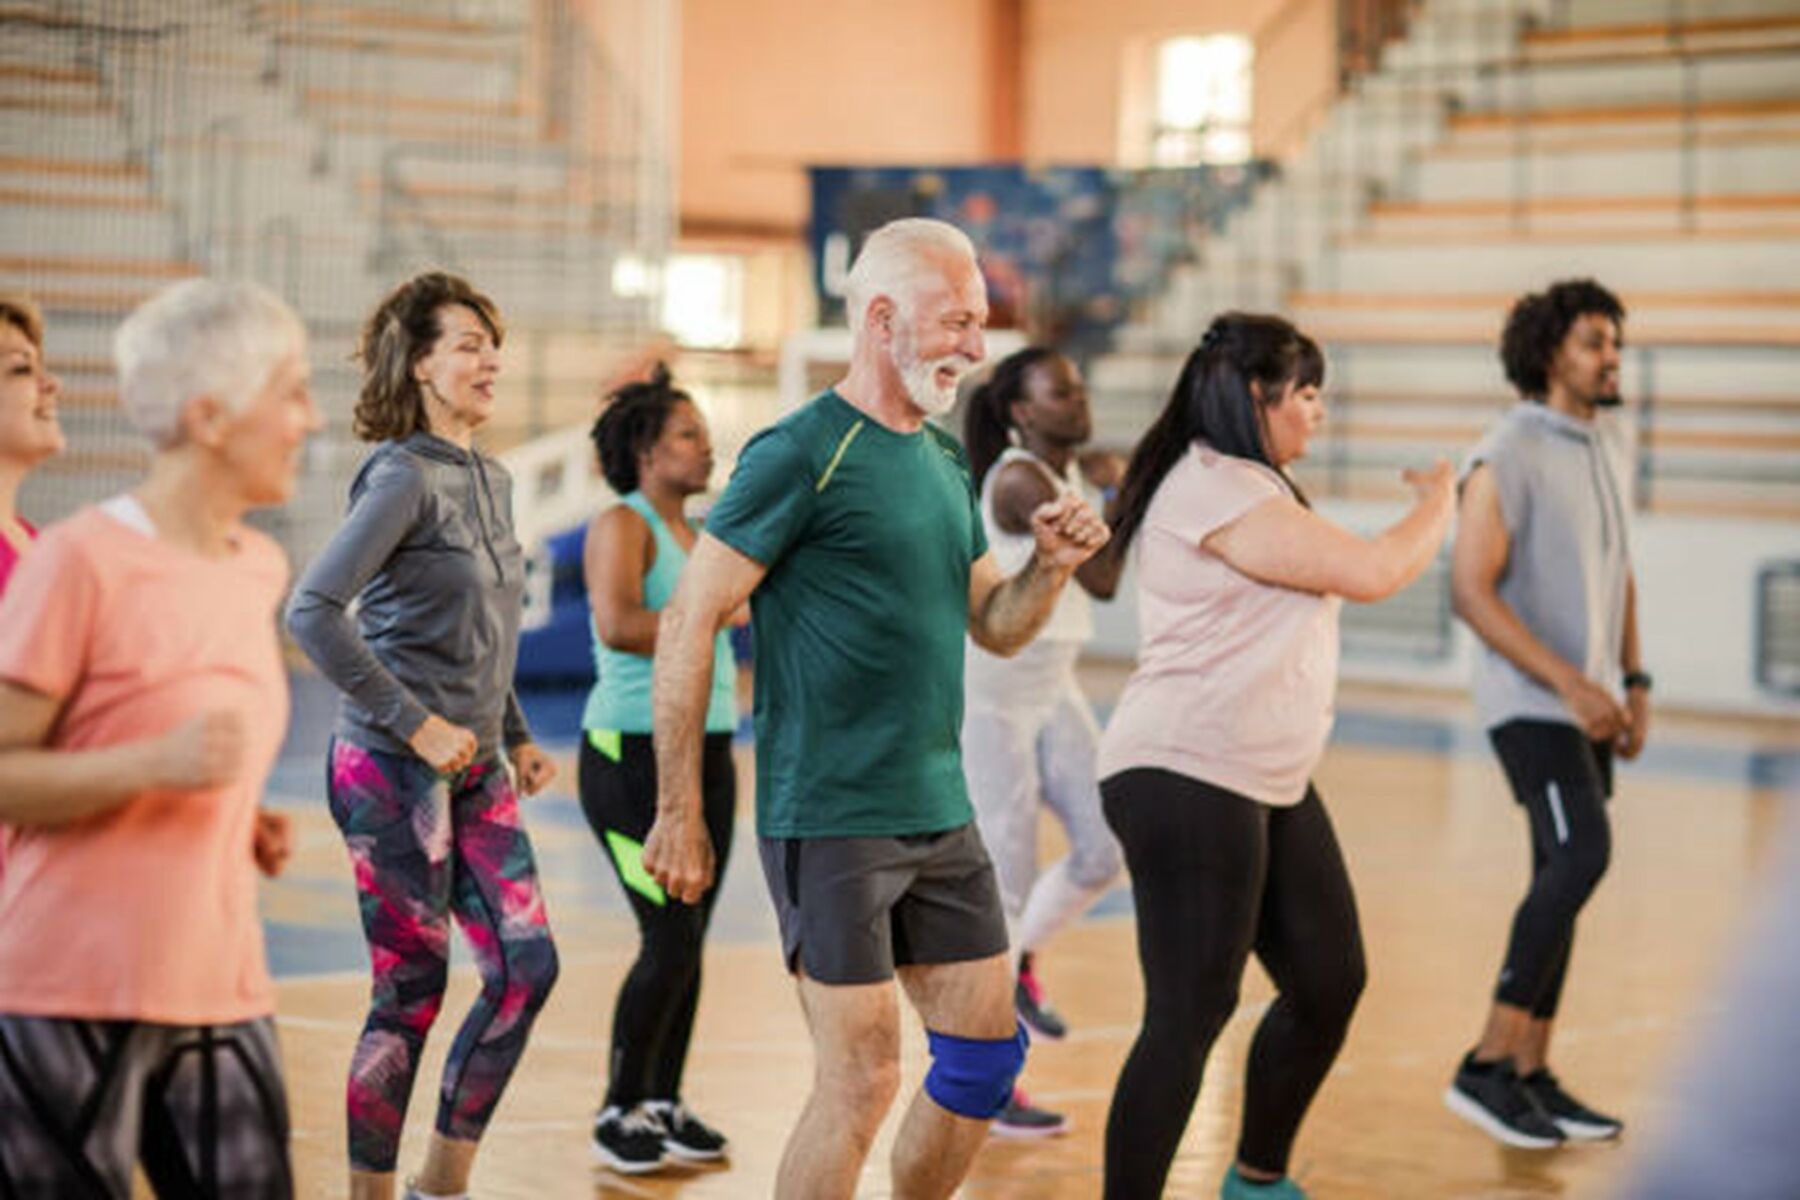 Activities for retirees to stay active and enjoy life | News by Thaiger